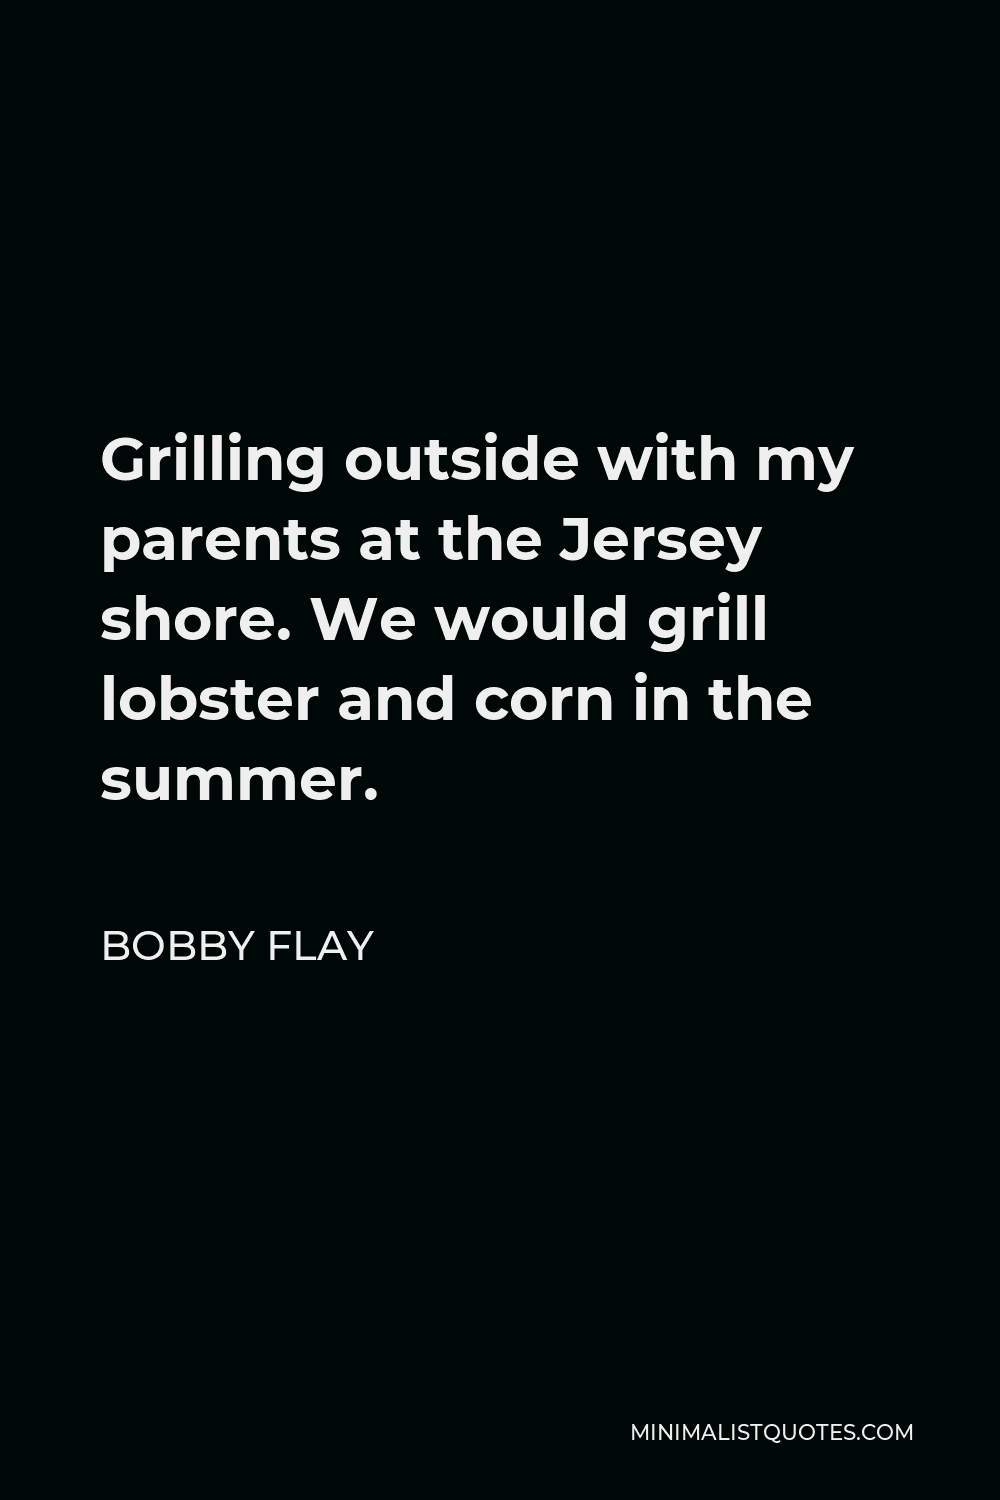 Bobby Flay Quote - Grilling outside with my parents at the Jersey shore. We would grill lobster and corn in the summer.